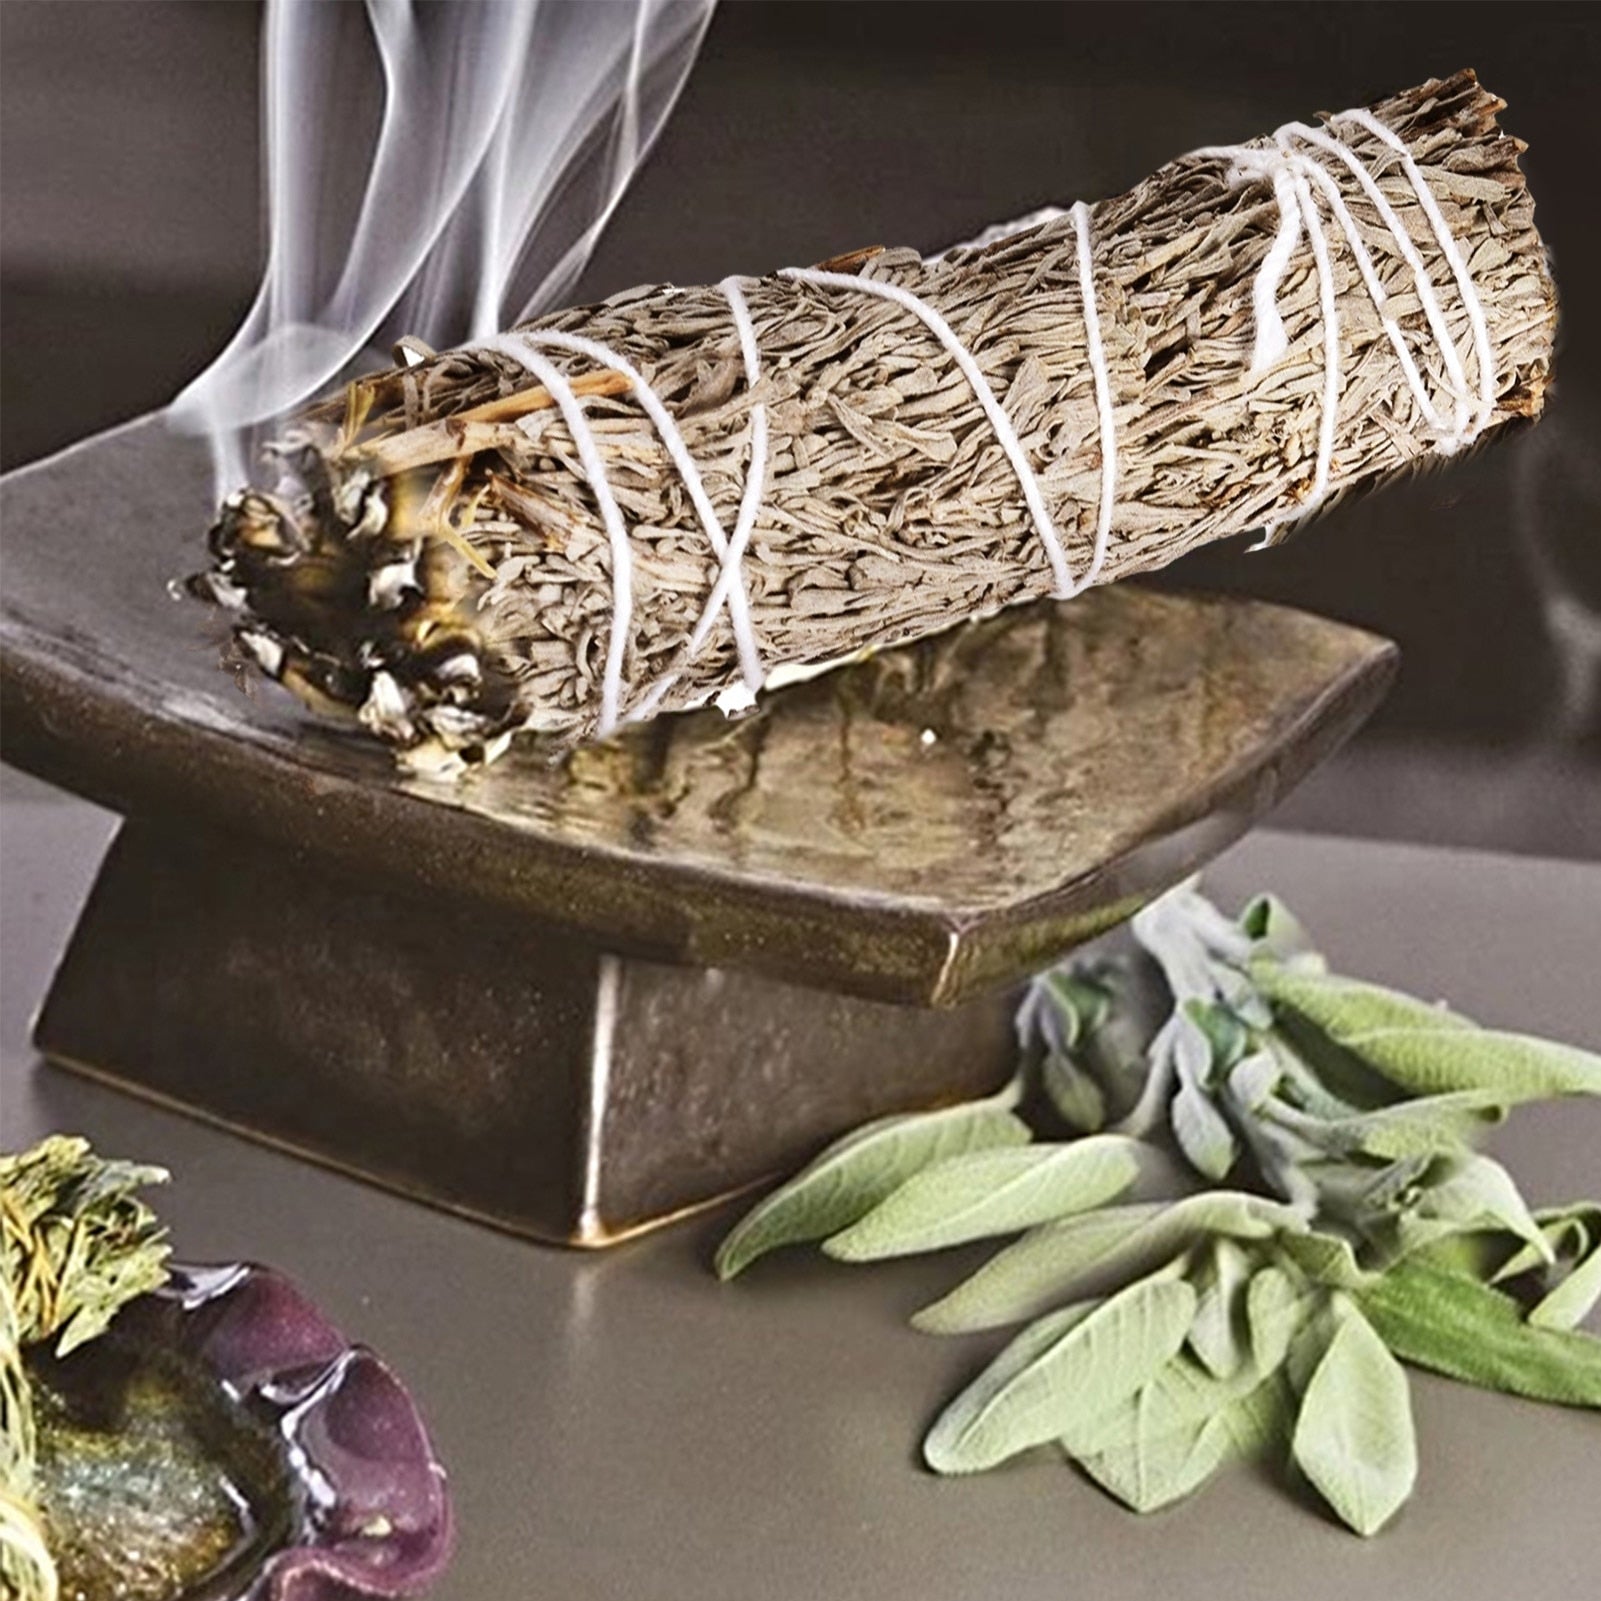 Perfect for Cleansing: The sage bundle has always been considered a sacred, cleansing, purifying and protecting plant.